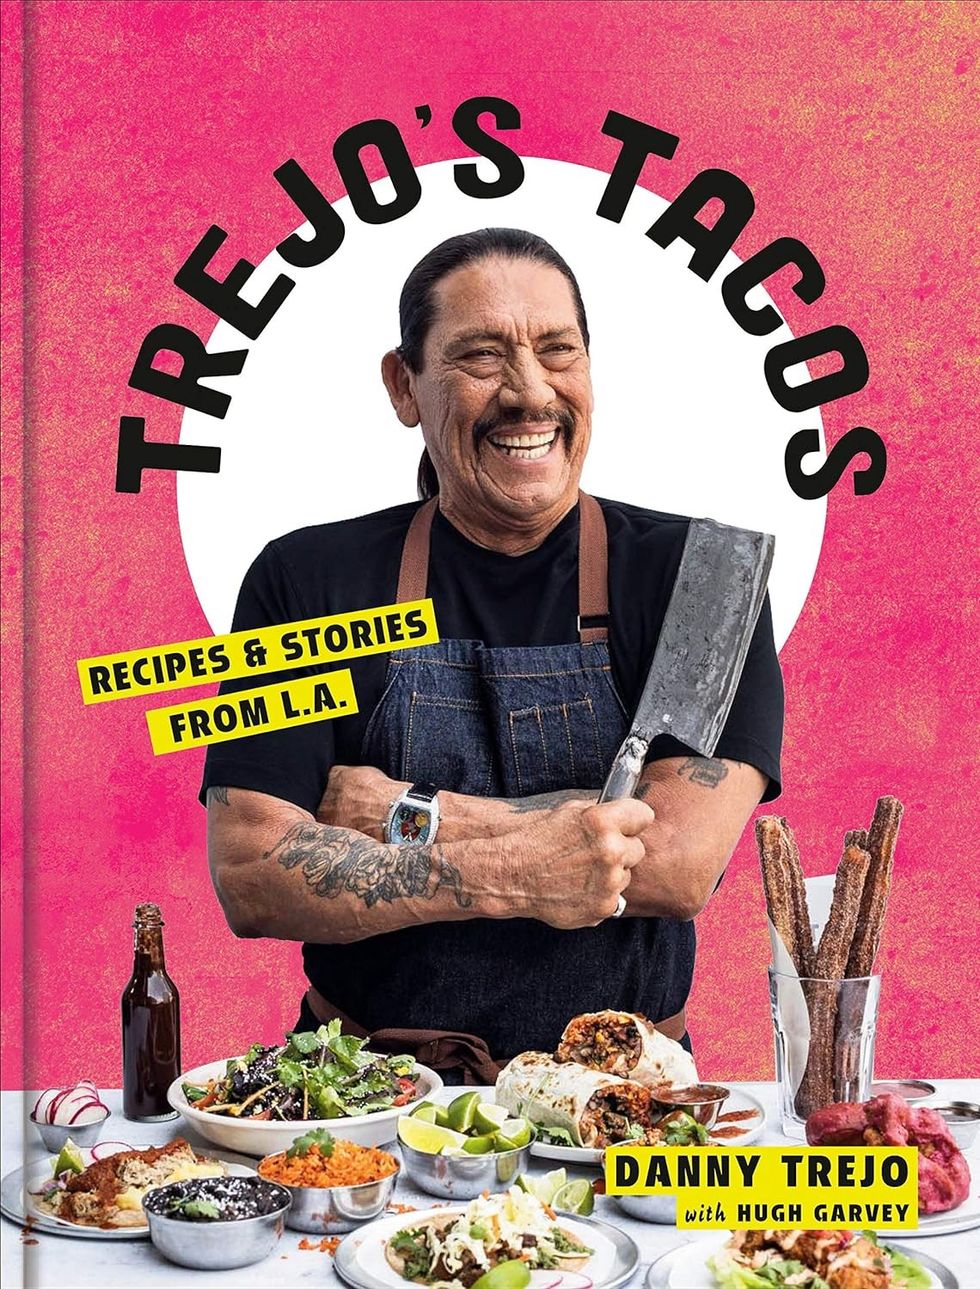 Trejo's Tacos: Recipes and Stories from L.A. by Danny Trejo with Hugh Garvey